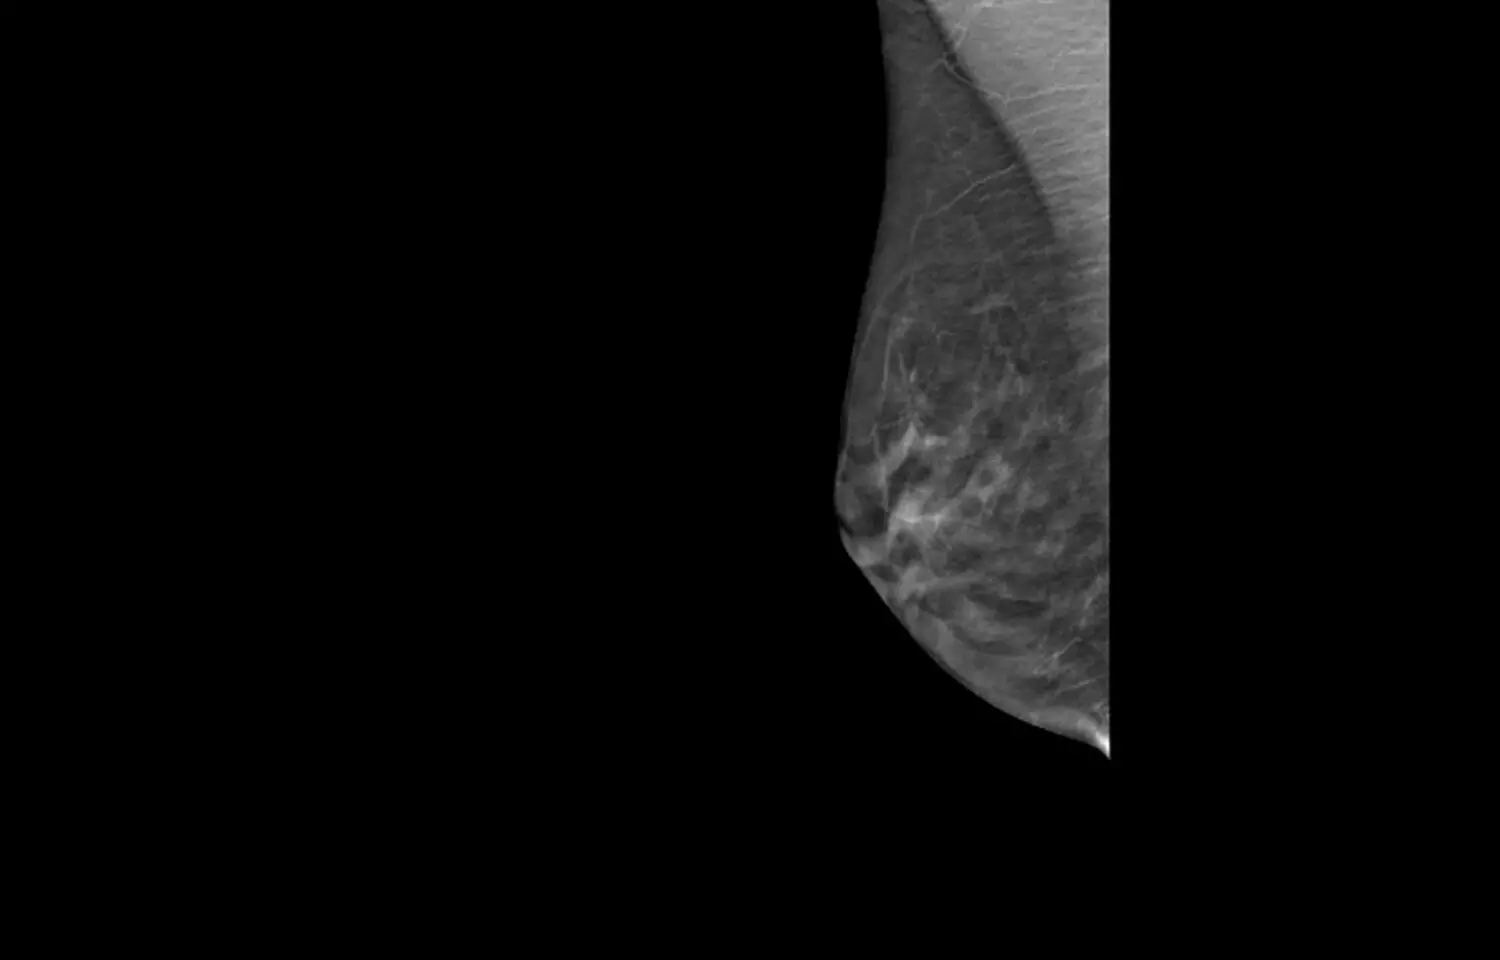 Ultrasound combined with DBT decreases mammography screening recall rate: Study